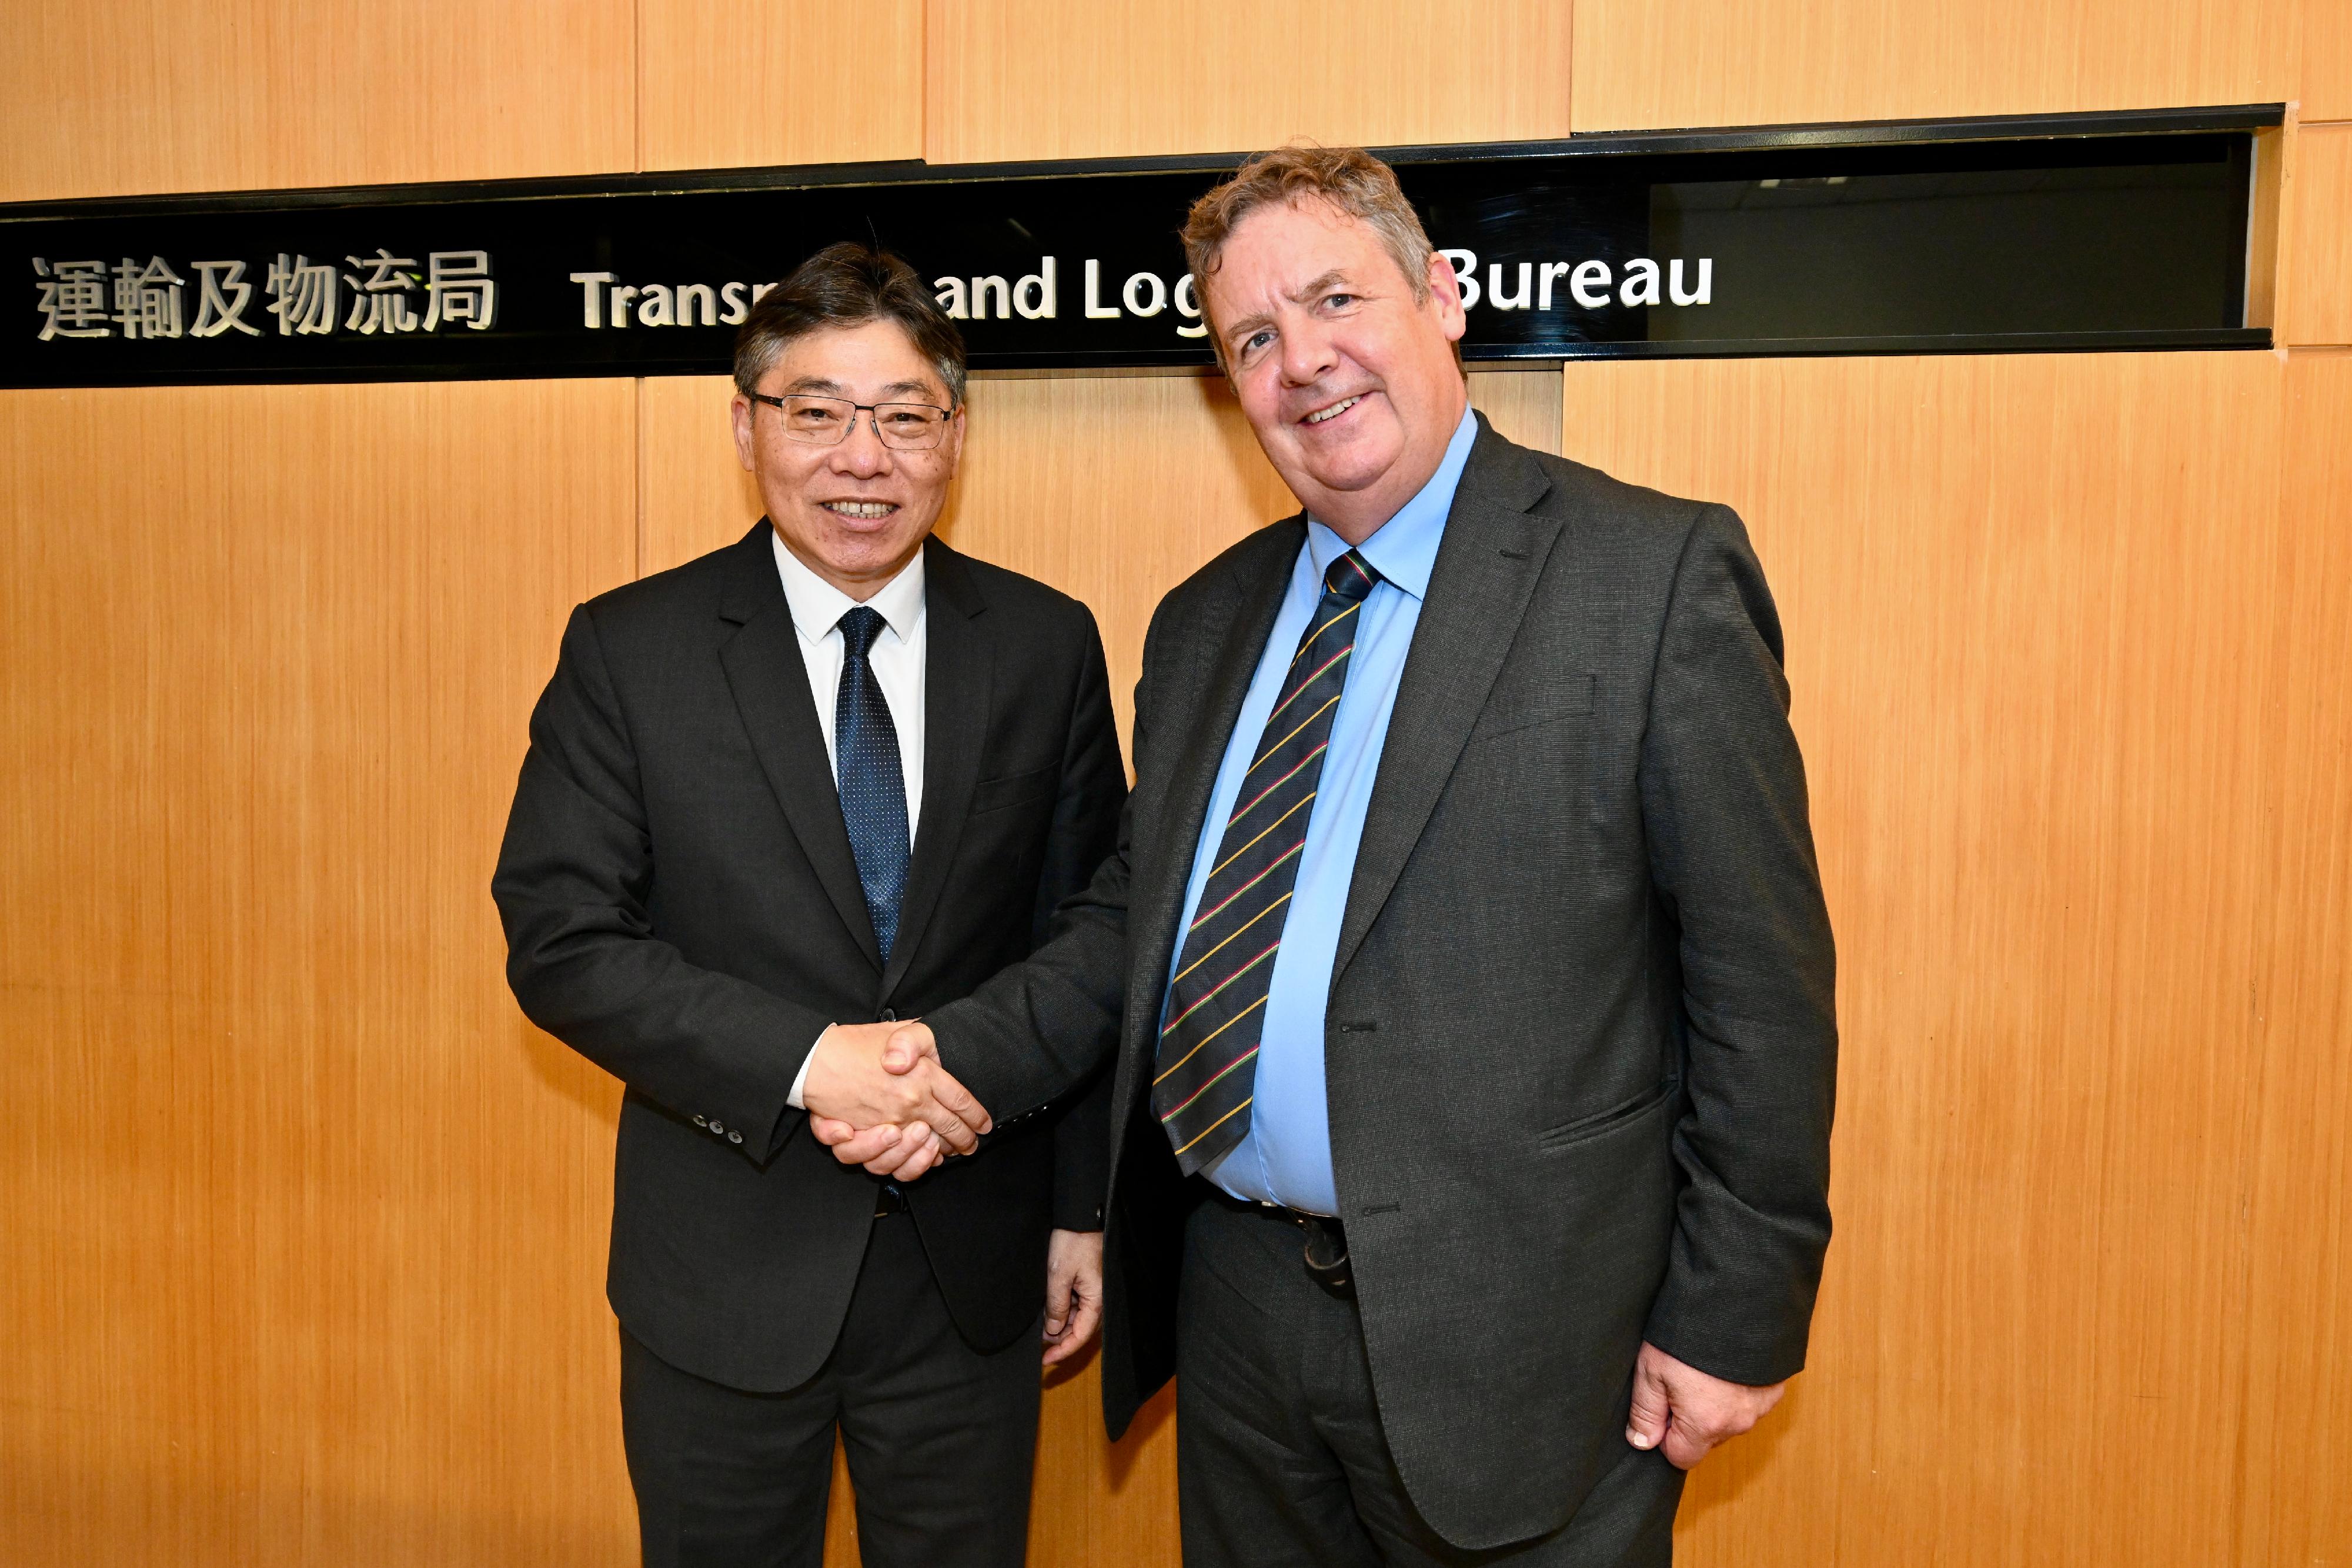 The Secretary for Transport and Logistics, Mr Lam Sai-hung (left), and the Secretary General of the International Chamber of Shipping, Mr Guy Platten, meet today (May 28) to exchange views about the latest developments in the global maritime industry.